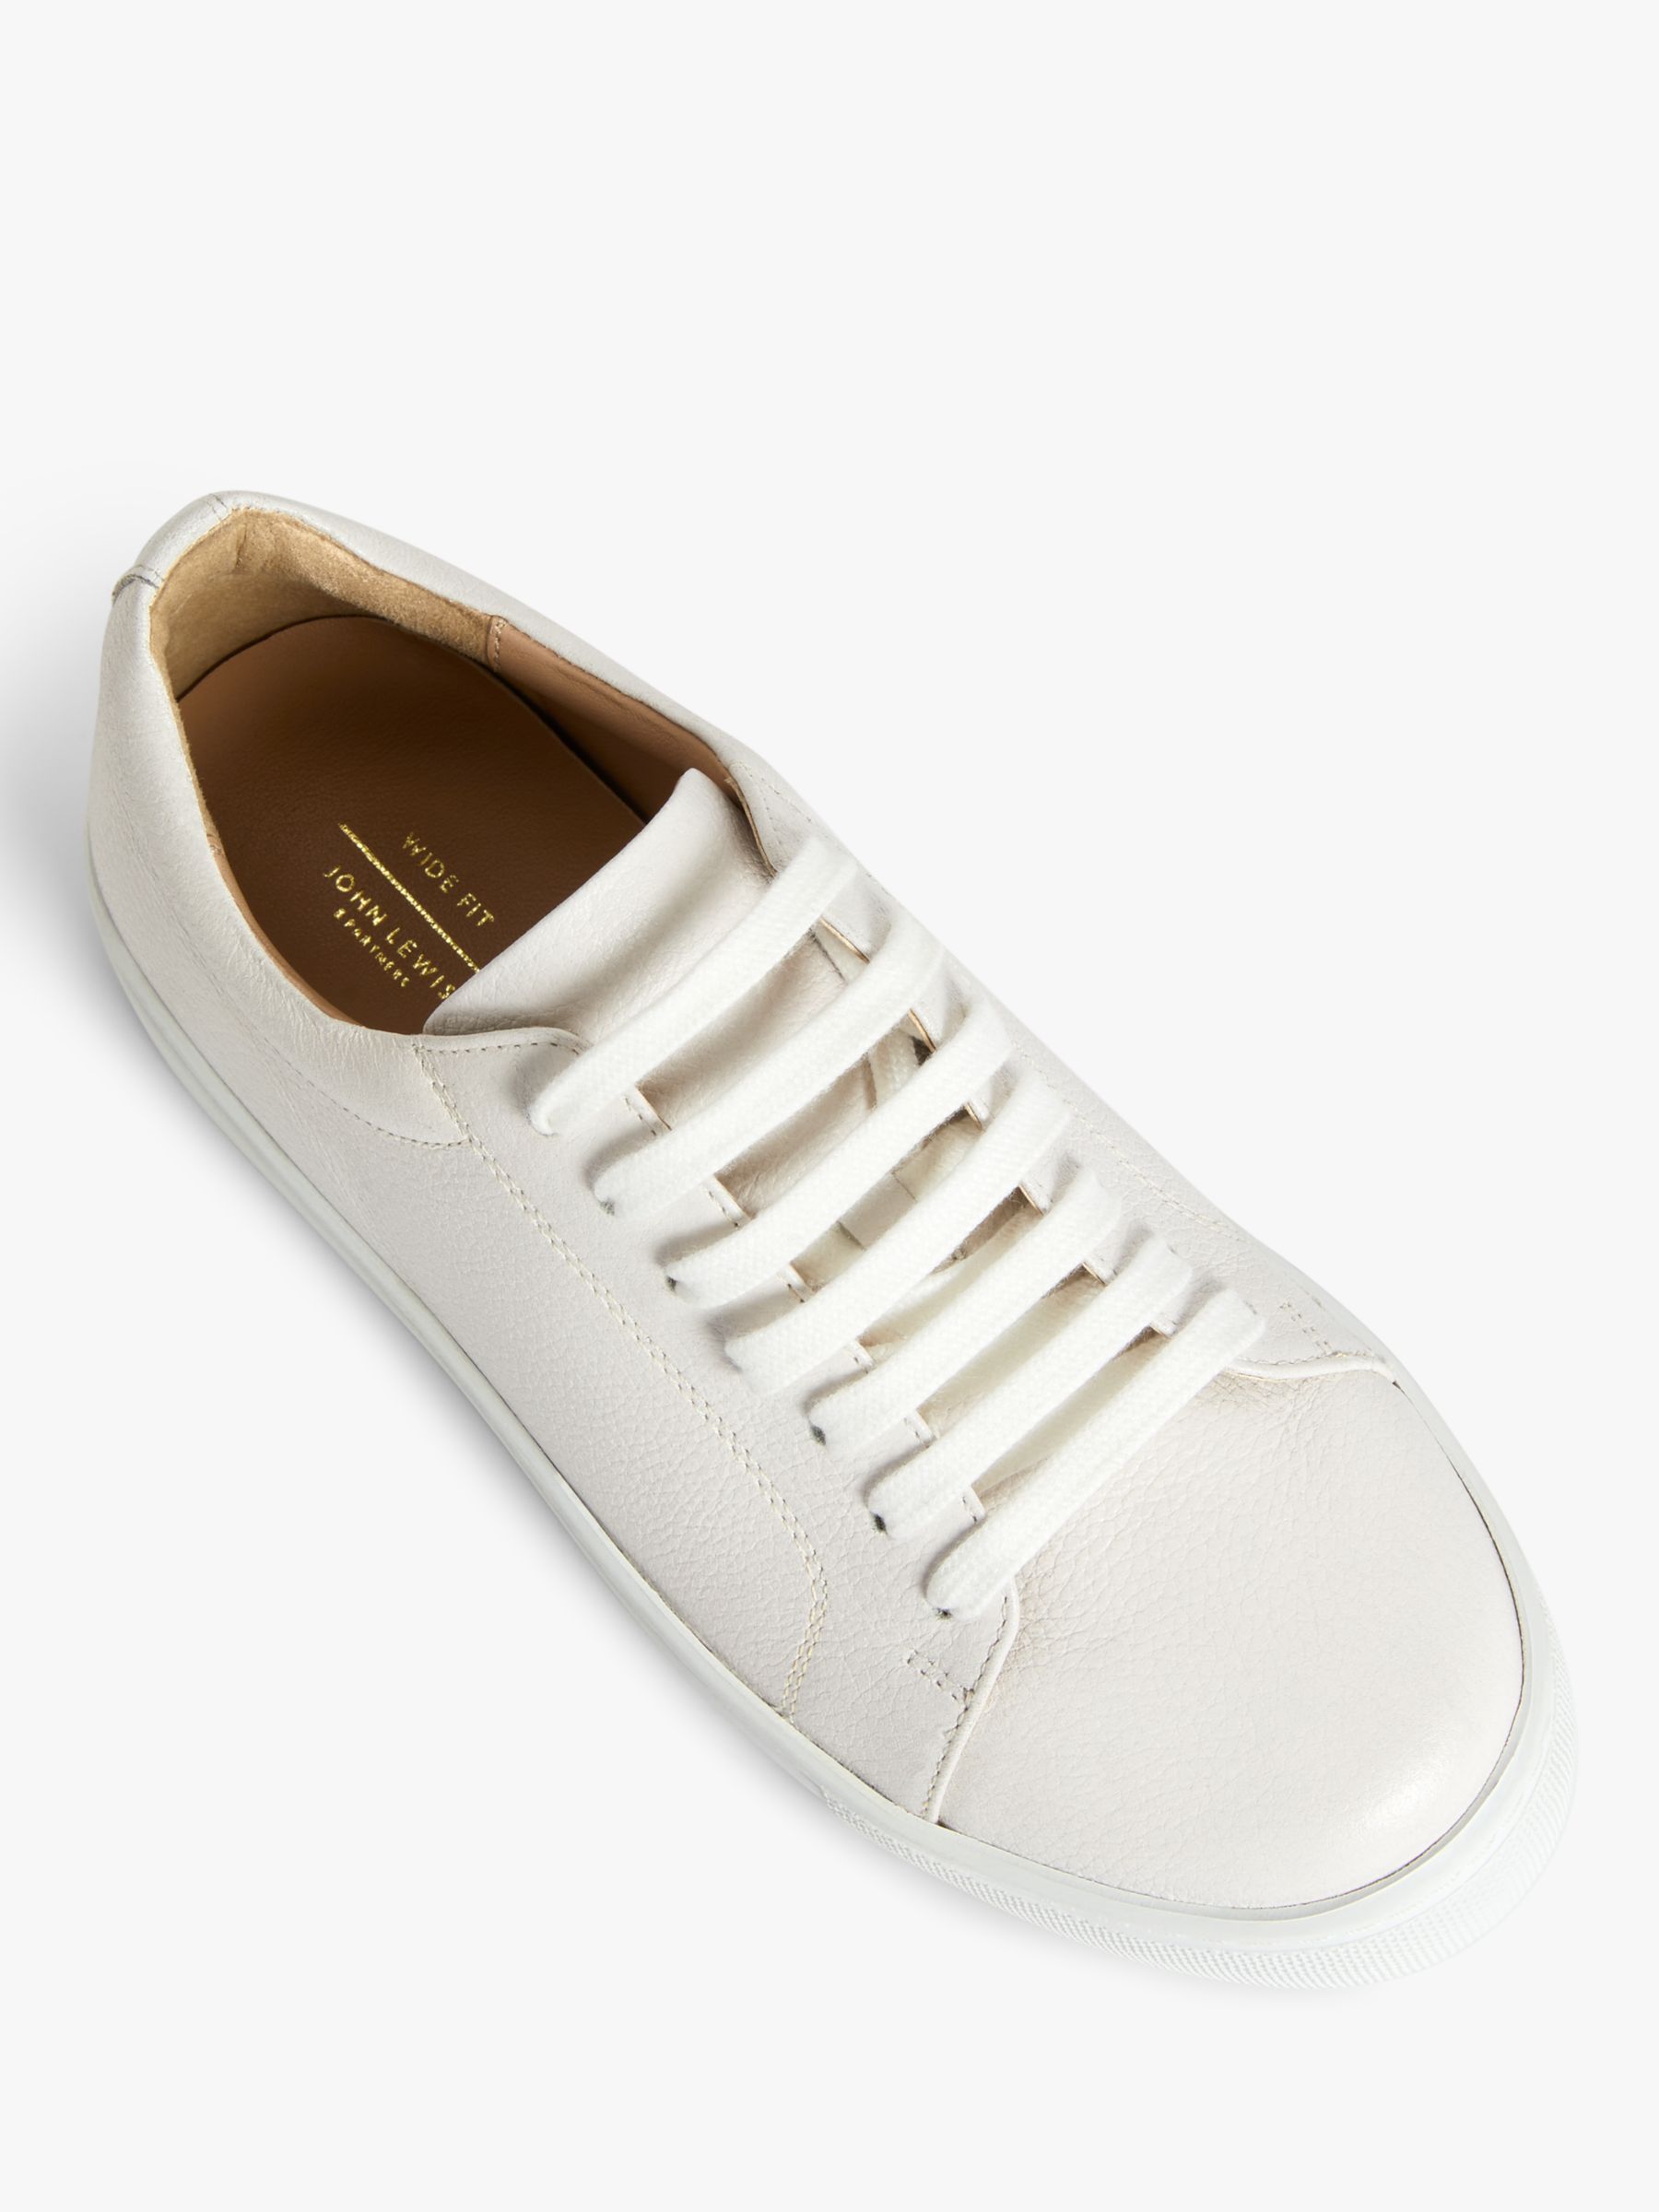 John Lewis Florette Wide Fit Leather Trainers, White, 3